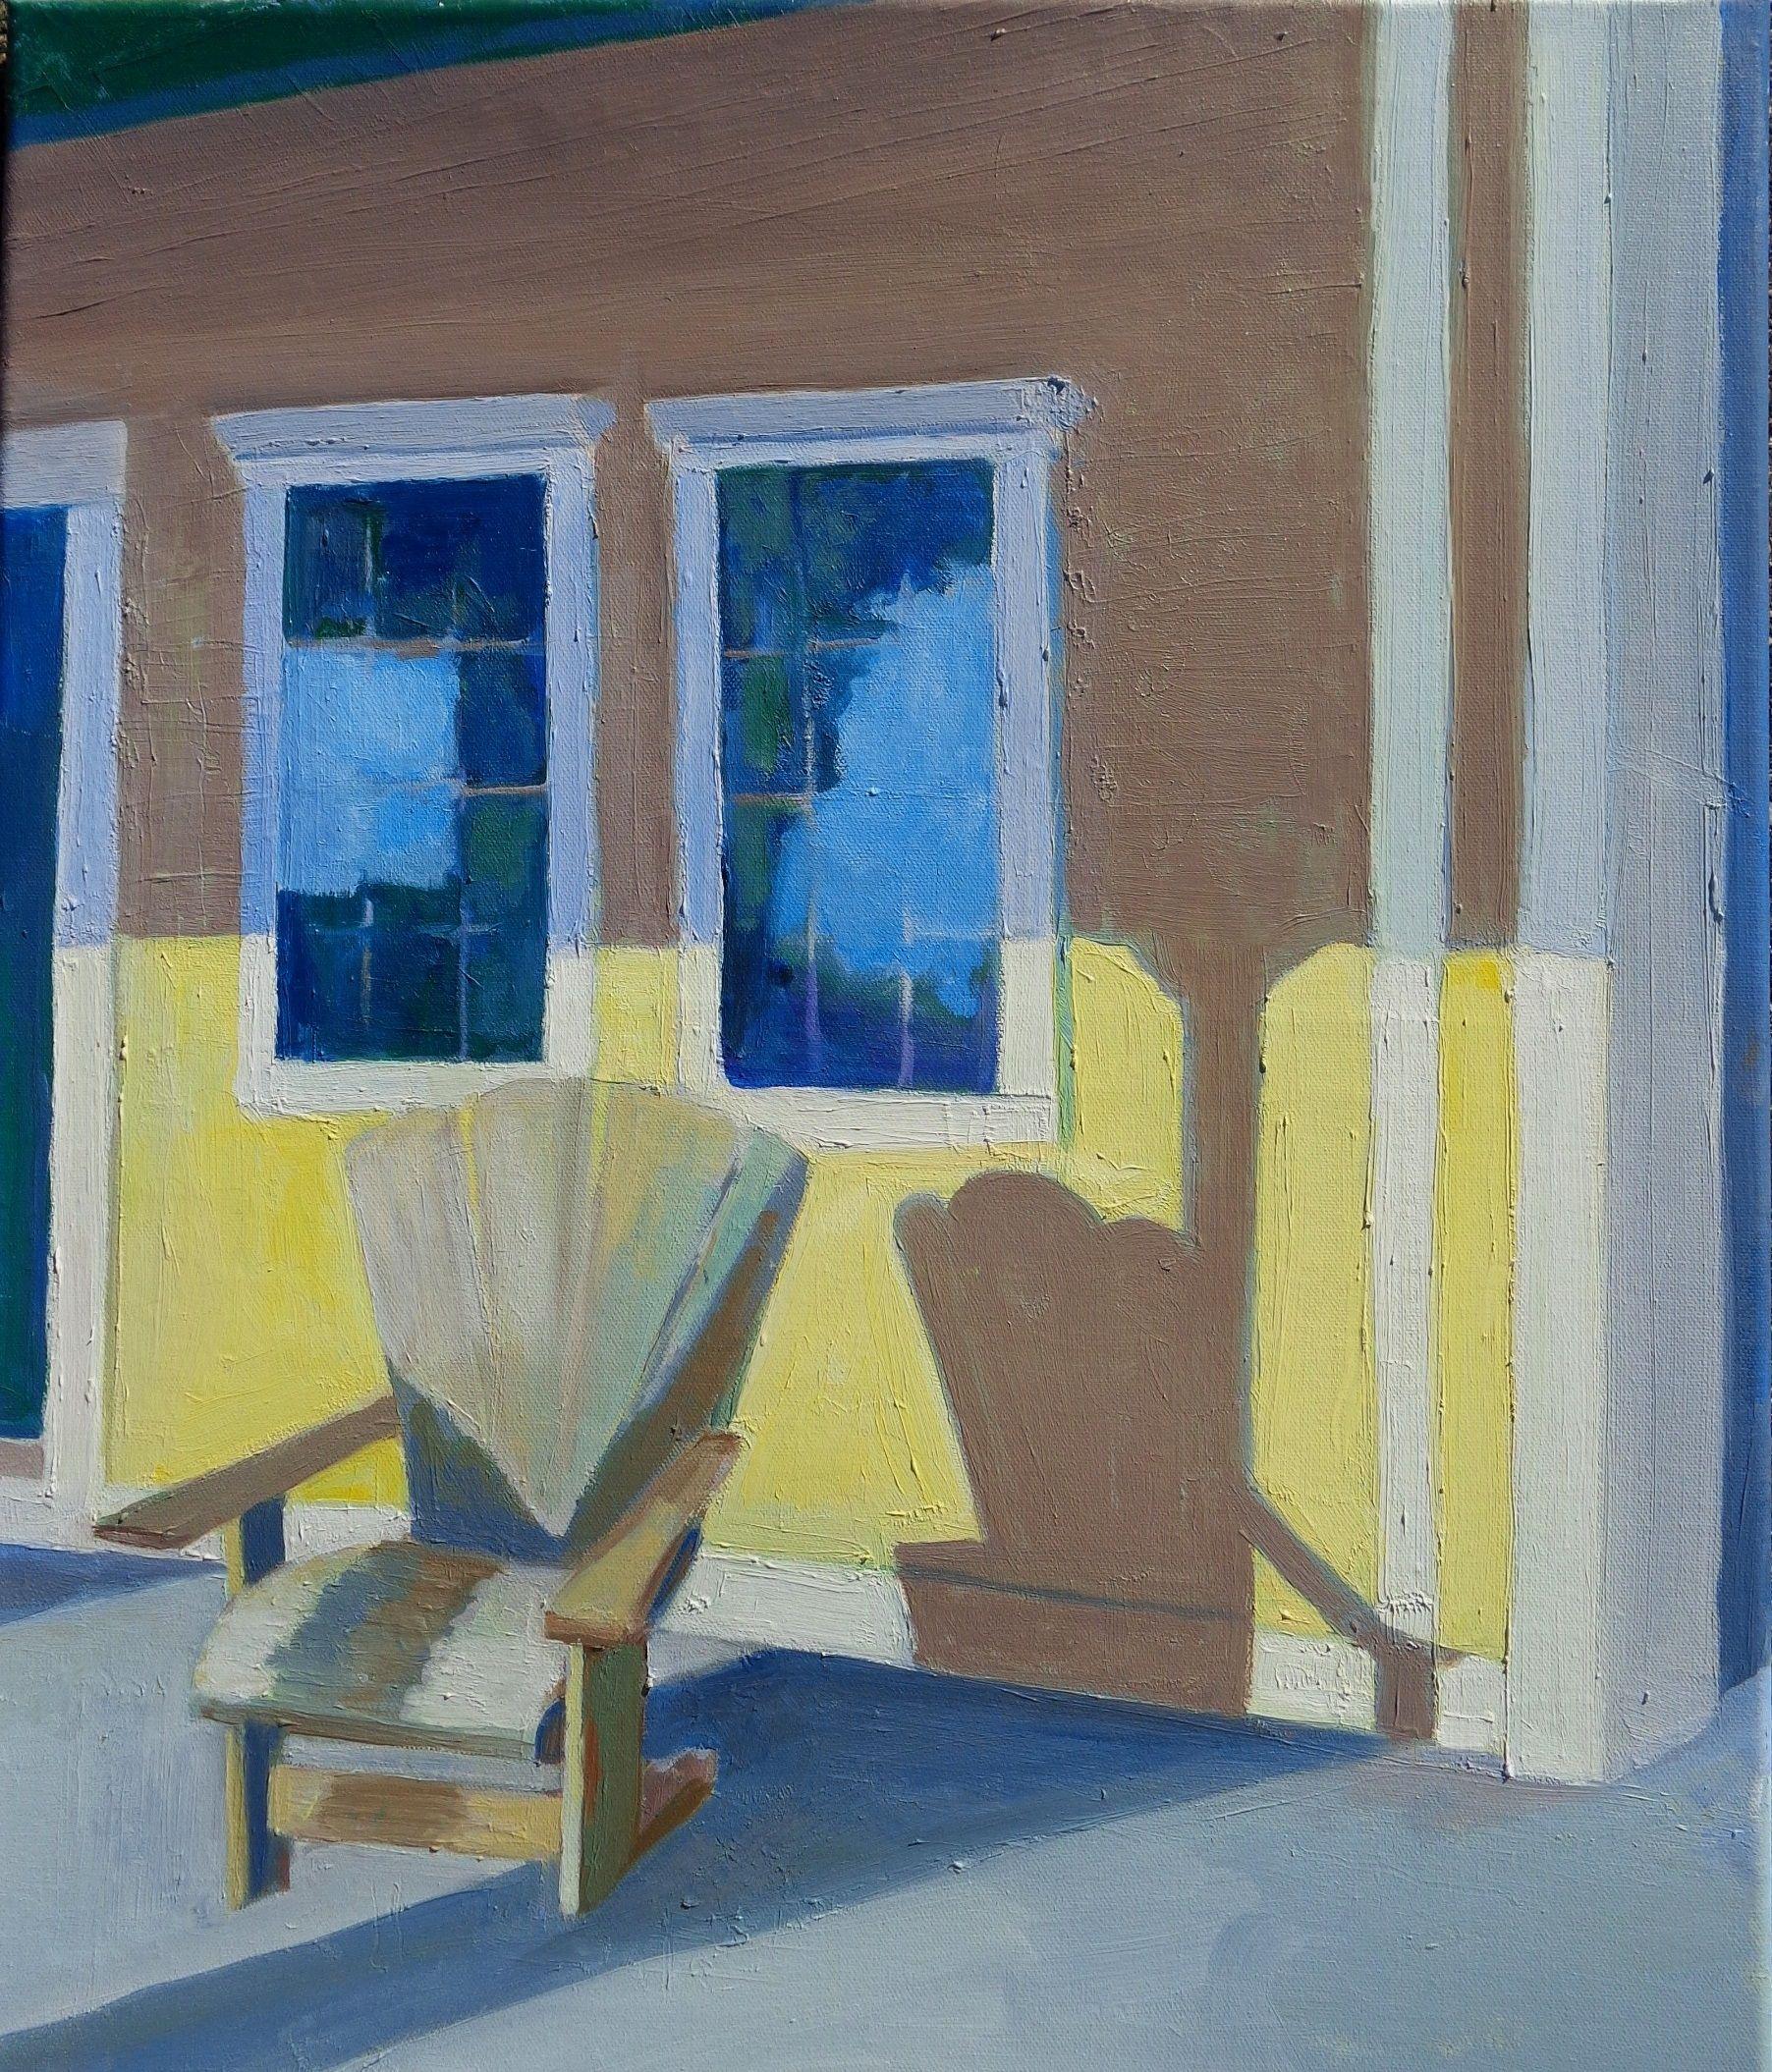 The painting developed from my walks at The Wells Reserve at Laudholm Farm in Wells, Maine. The yellow of the historic buildings and the stark Maine winter light provided me with wonderful contrasts and colors for this work.      Once a saltwater